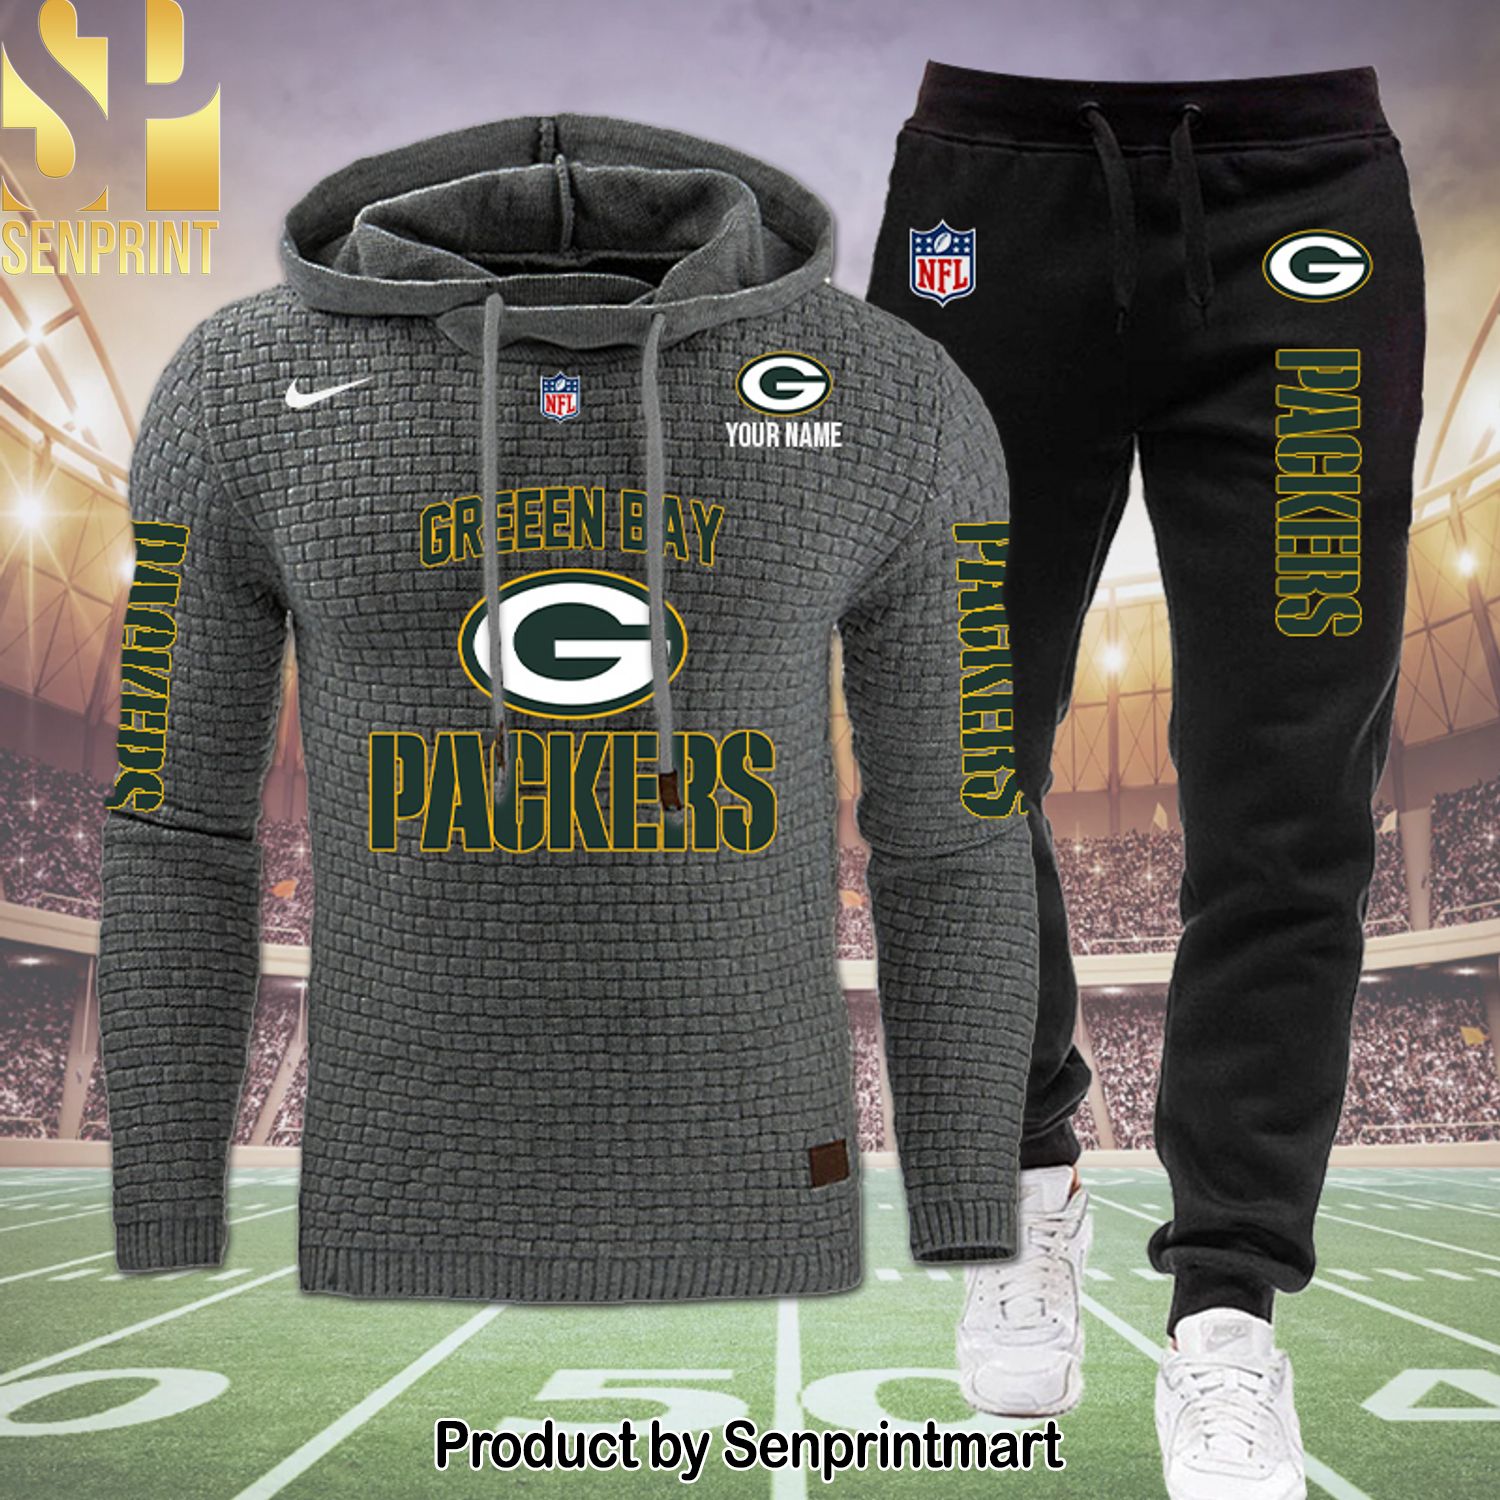 Green Bay Packers New Style Shirt and Pants